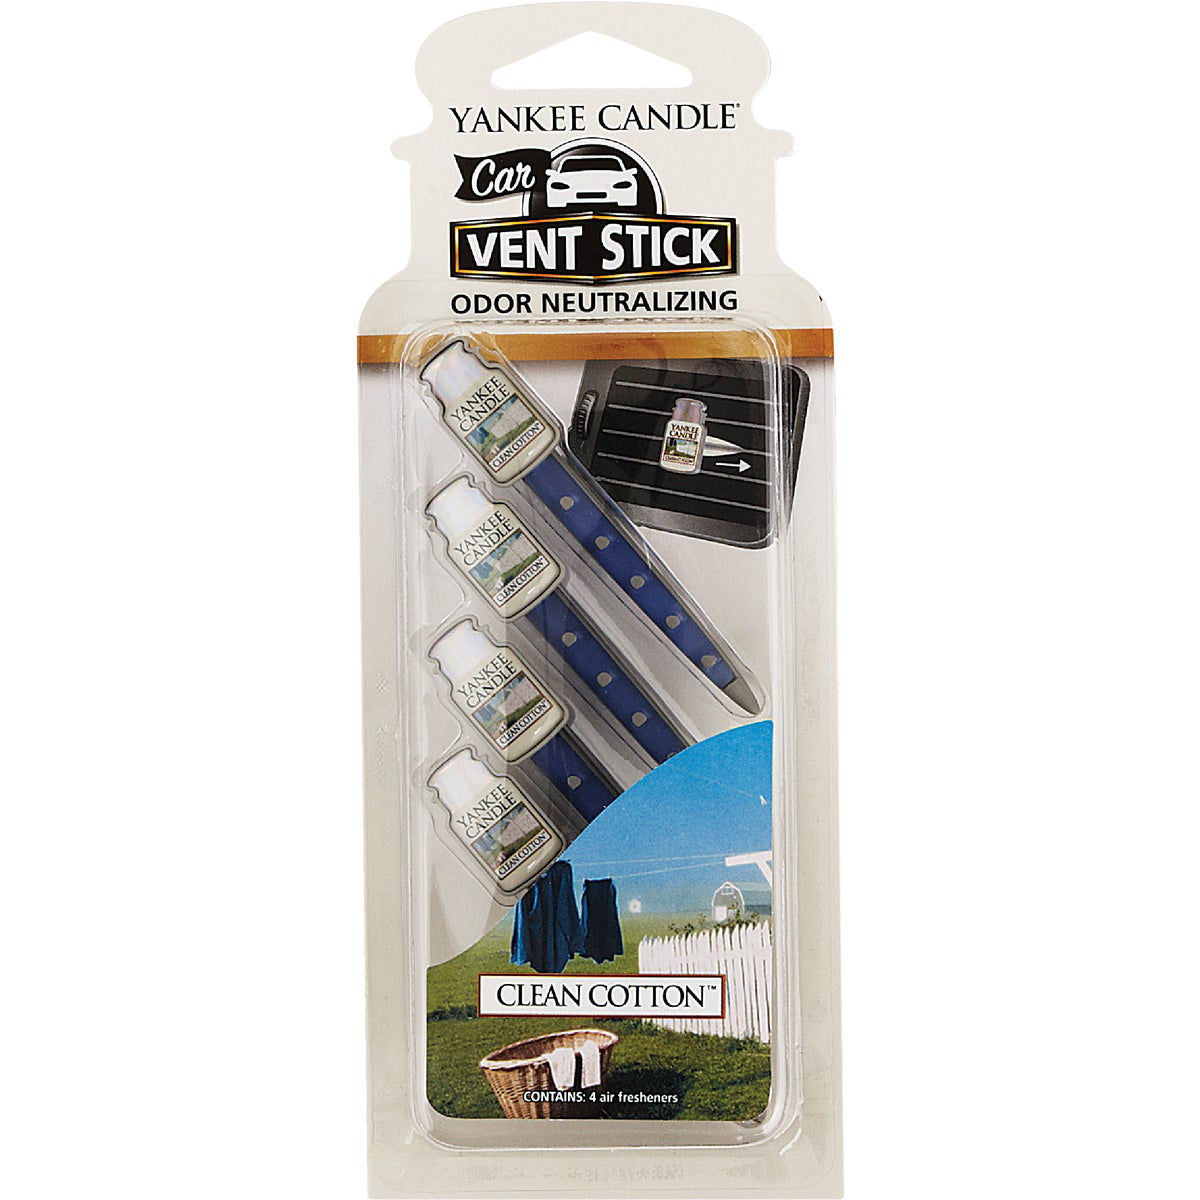 Yankee Candle Vent Stick Car Air Freshener, Clean Cotton (4-Pack)